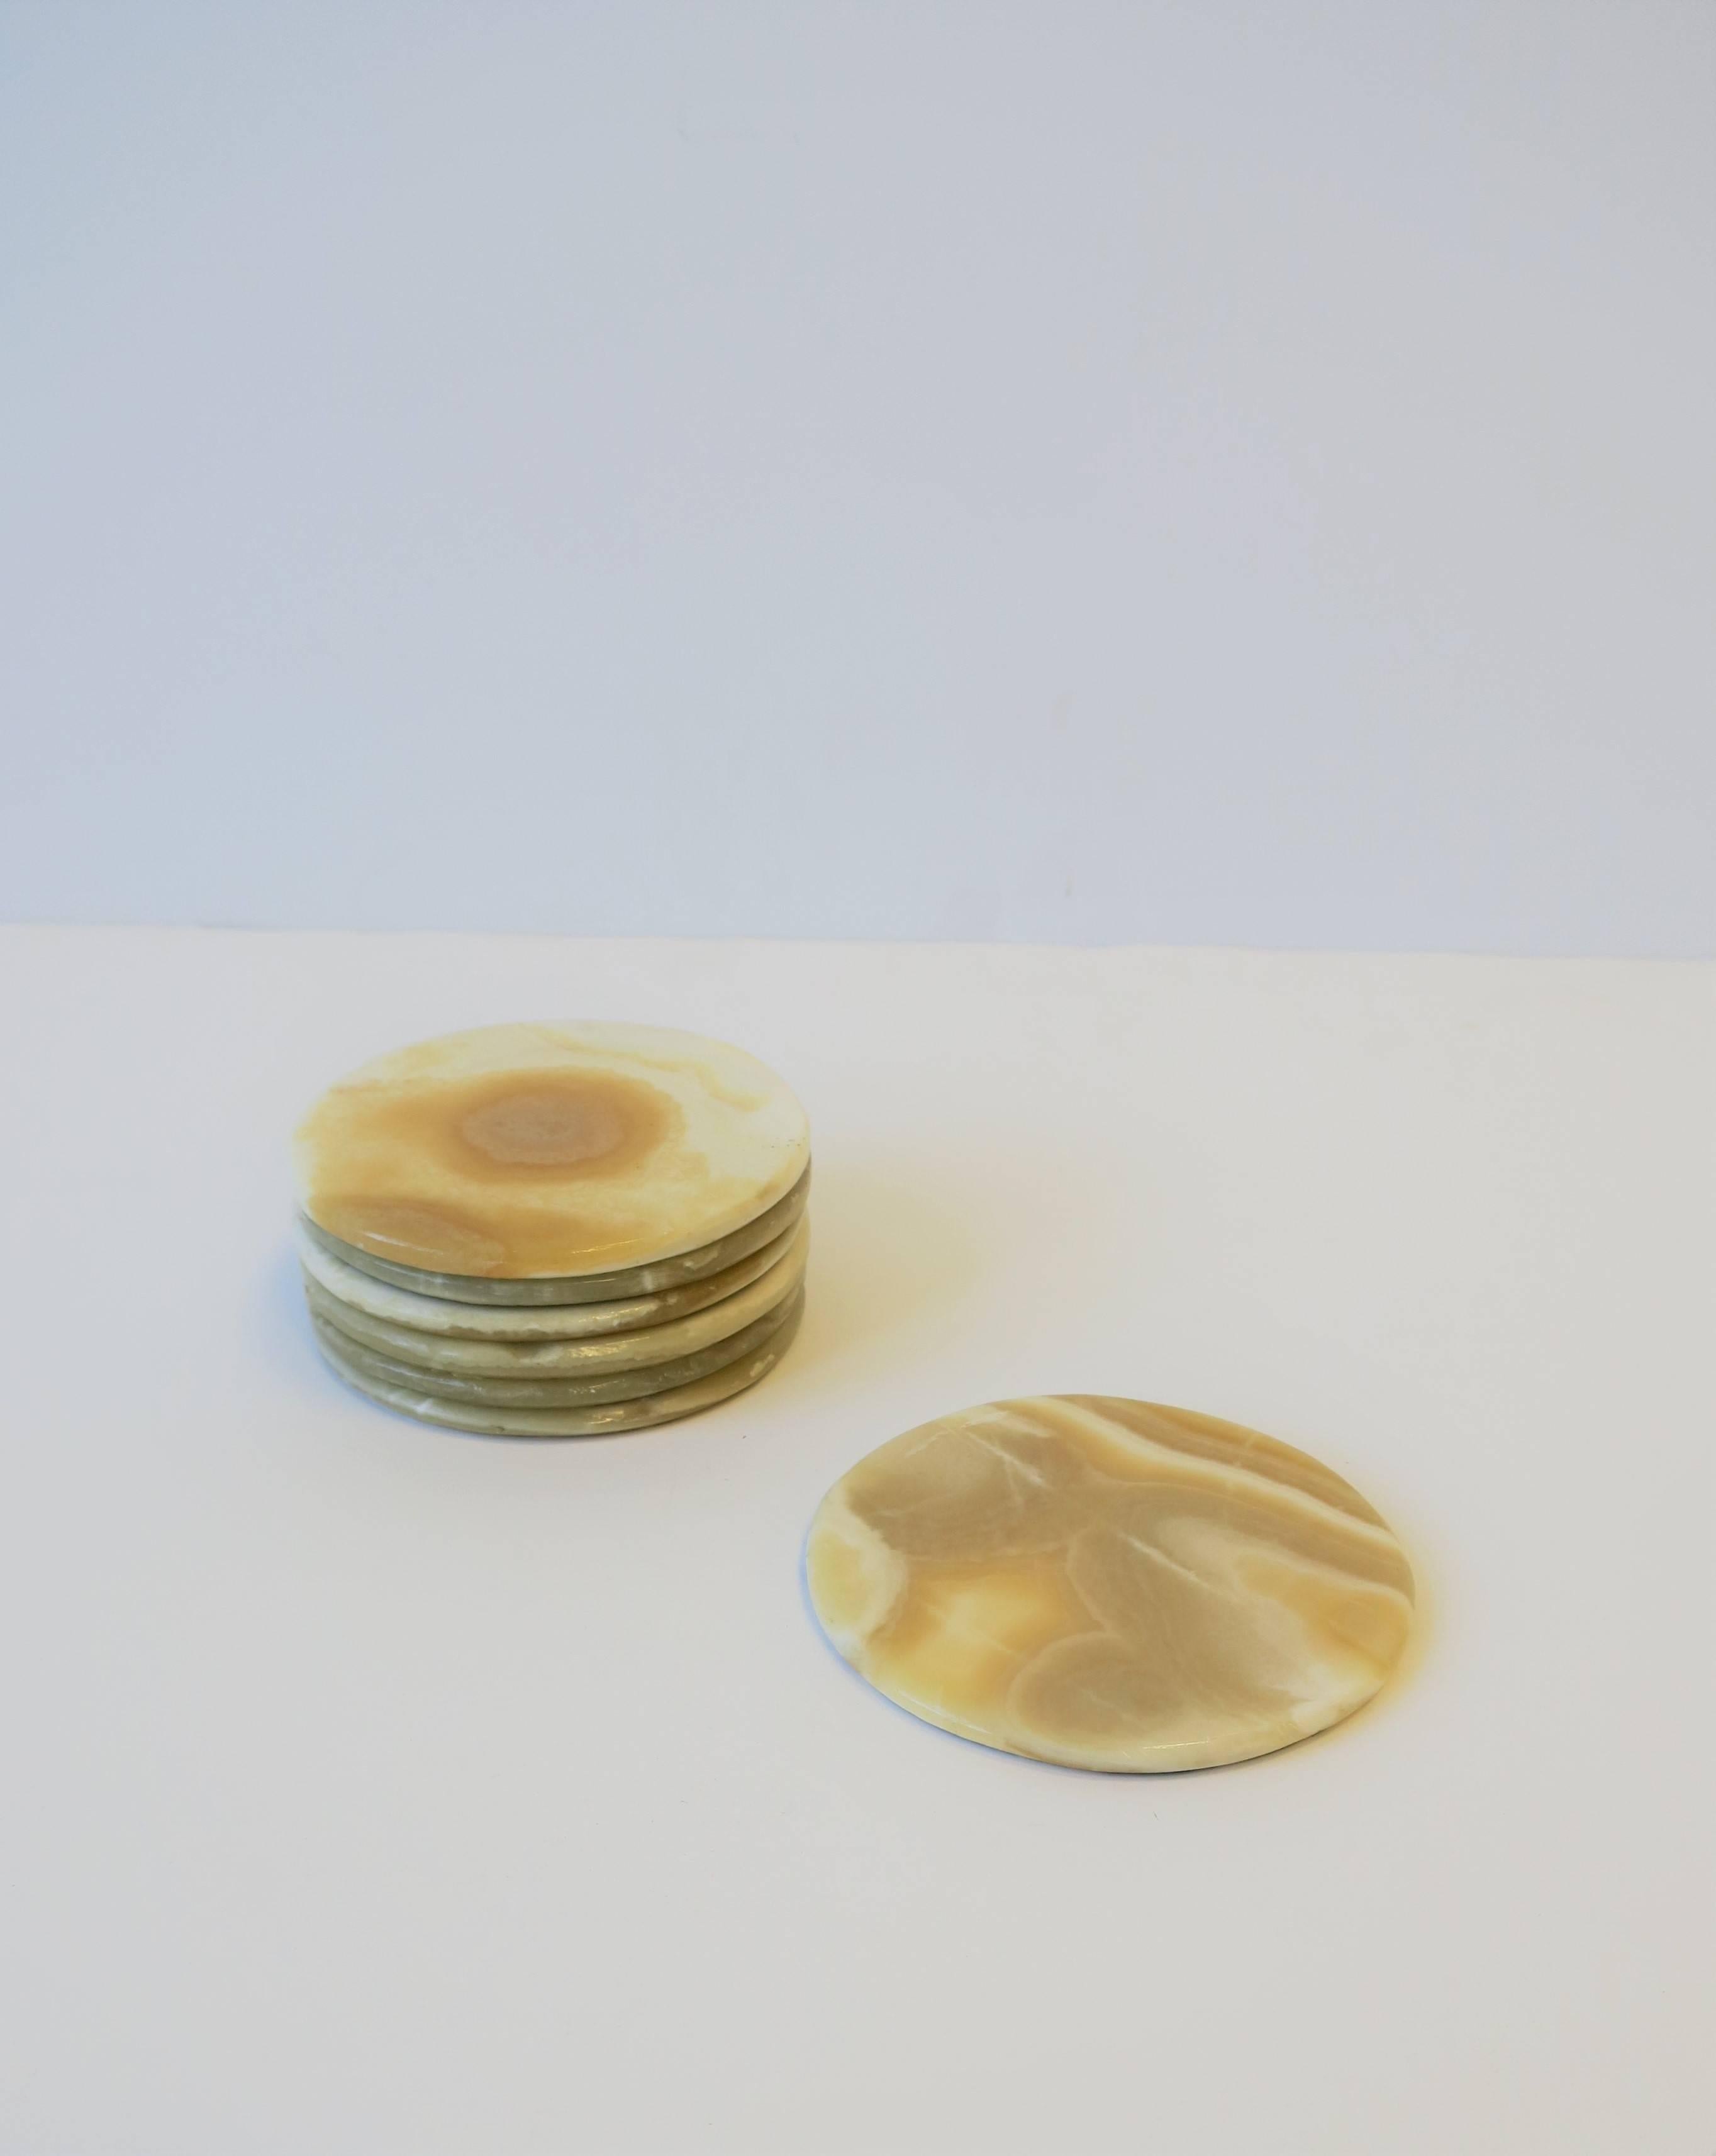 Late 20th Century Modern Onyx Marble Drinks or Cocktail Coaster Set, ca. 1970s